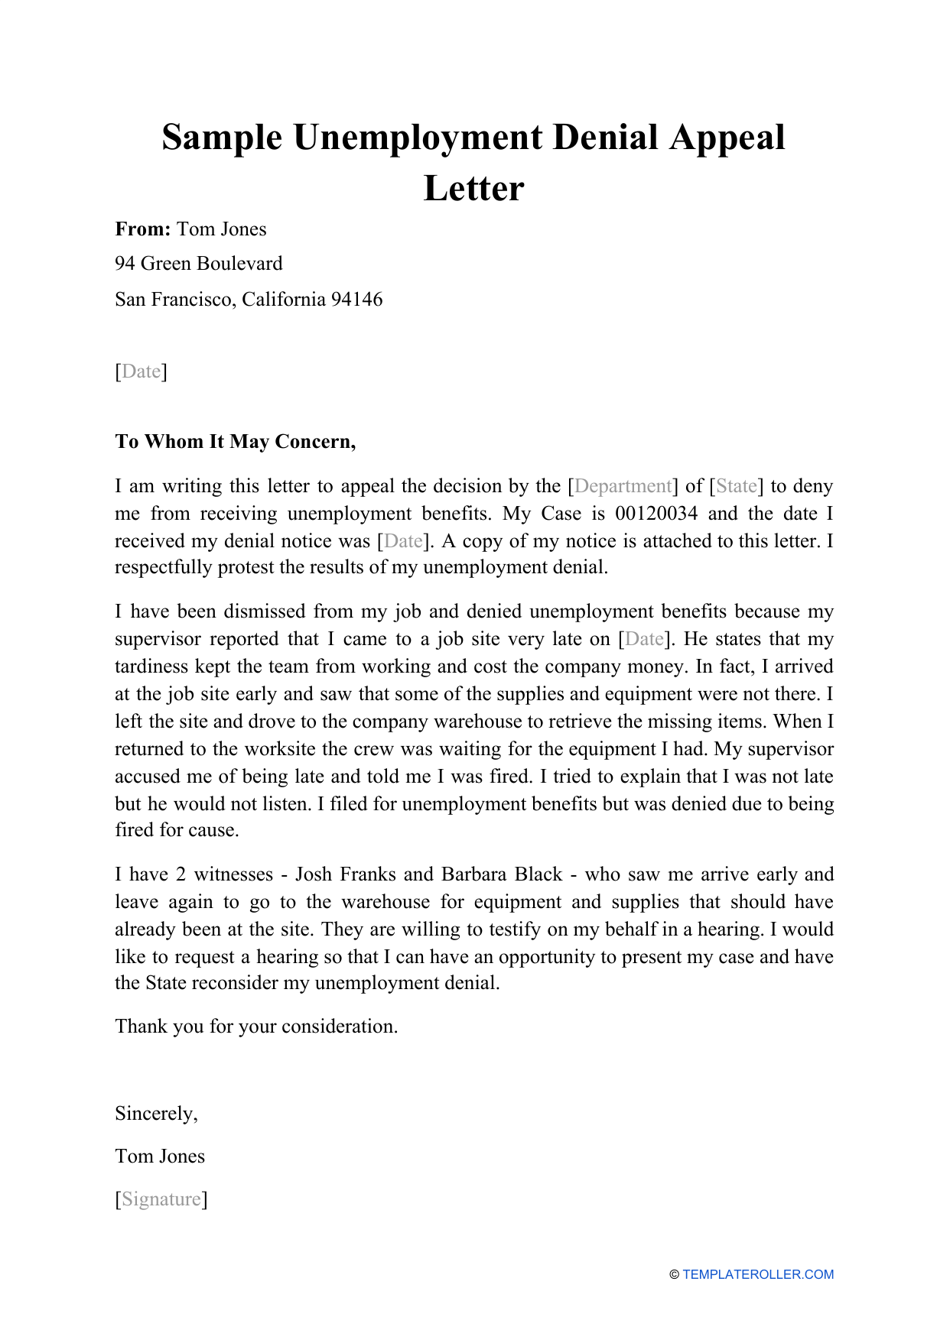 Sample Unemployment Denial Appeal Letter, Page 1